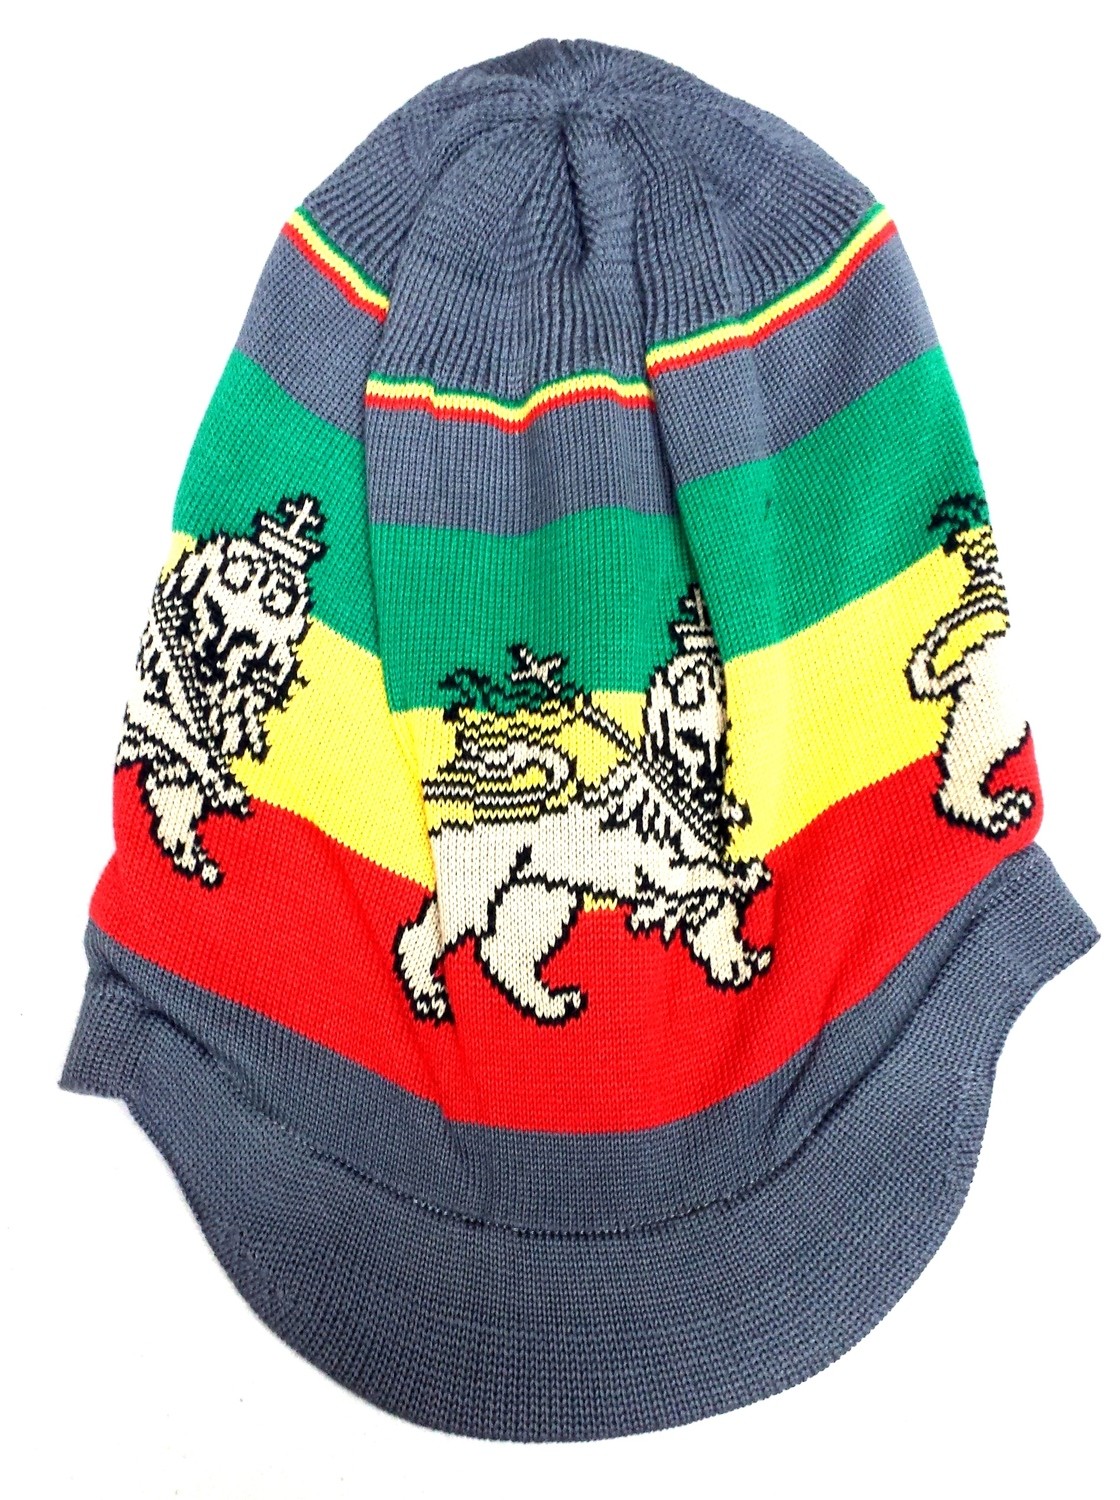 Grey Lion of Judah Rasta Hat Approx. 12 inches tall